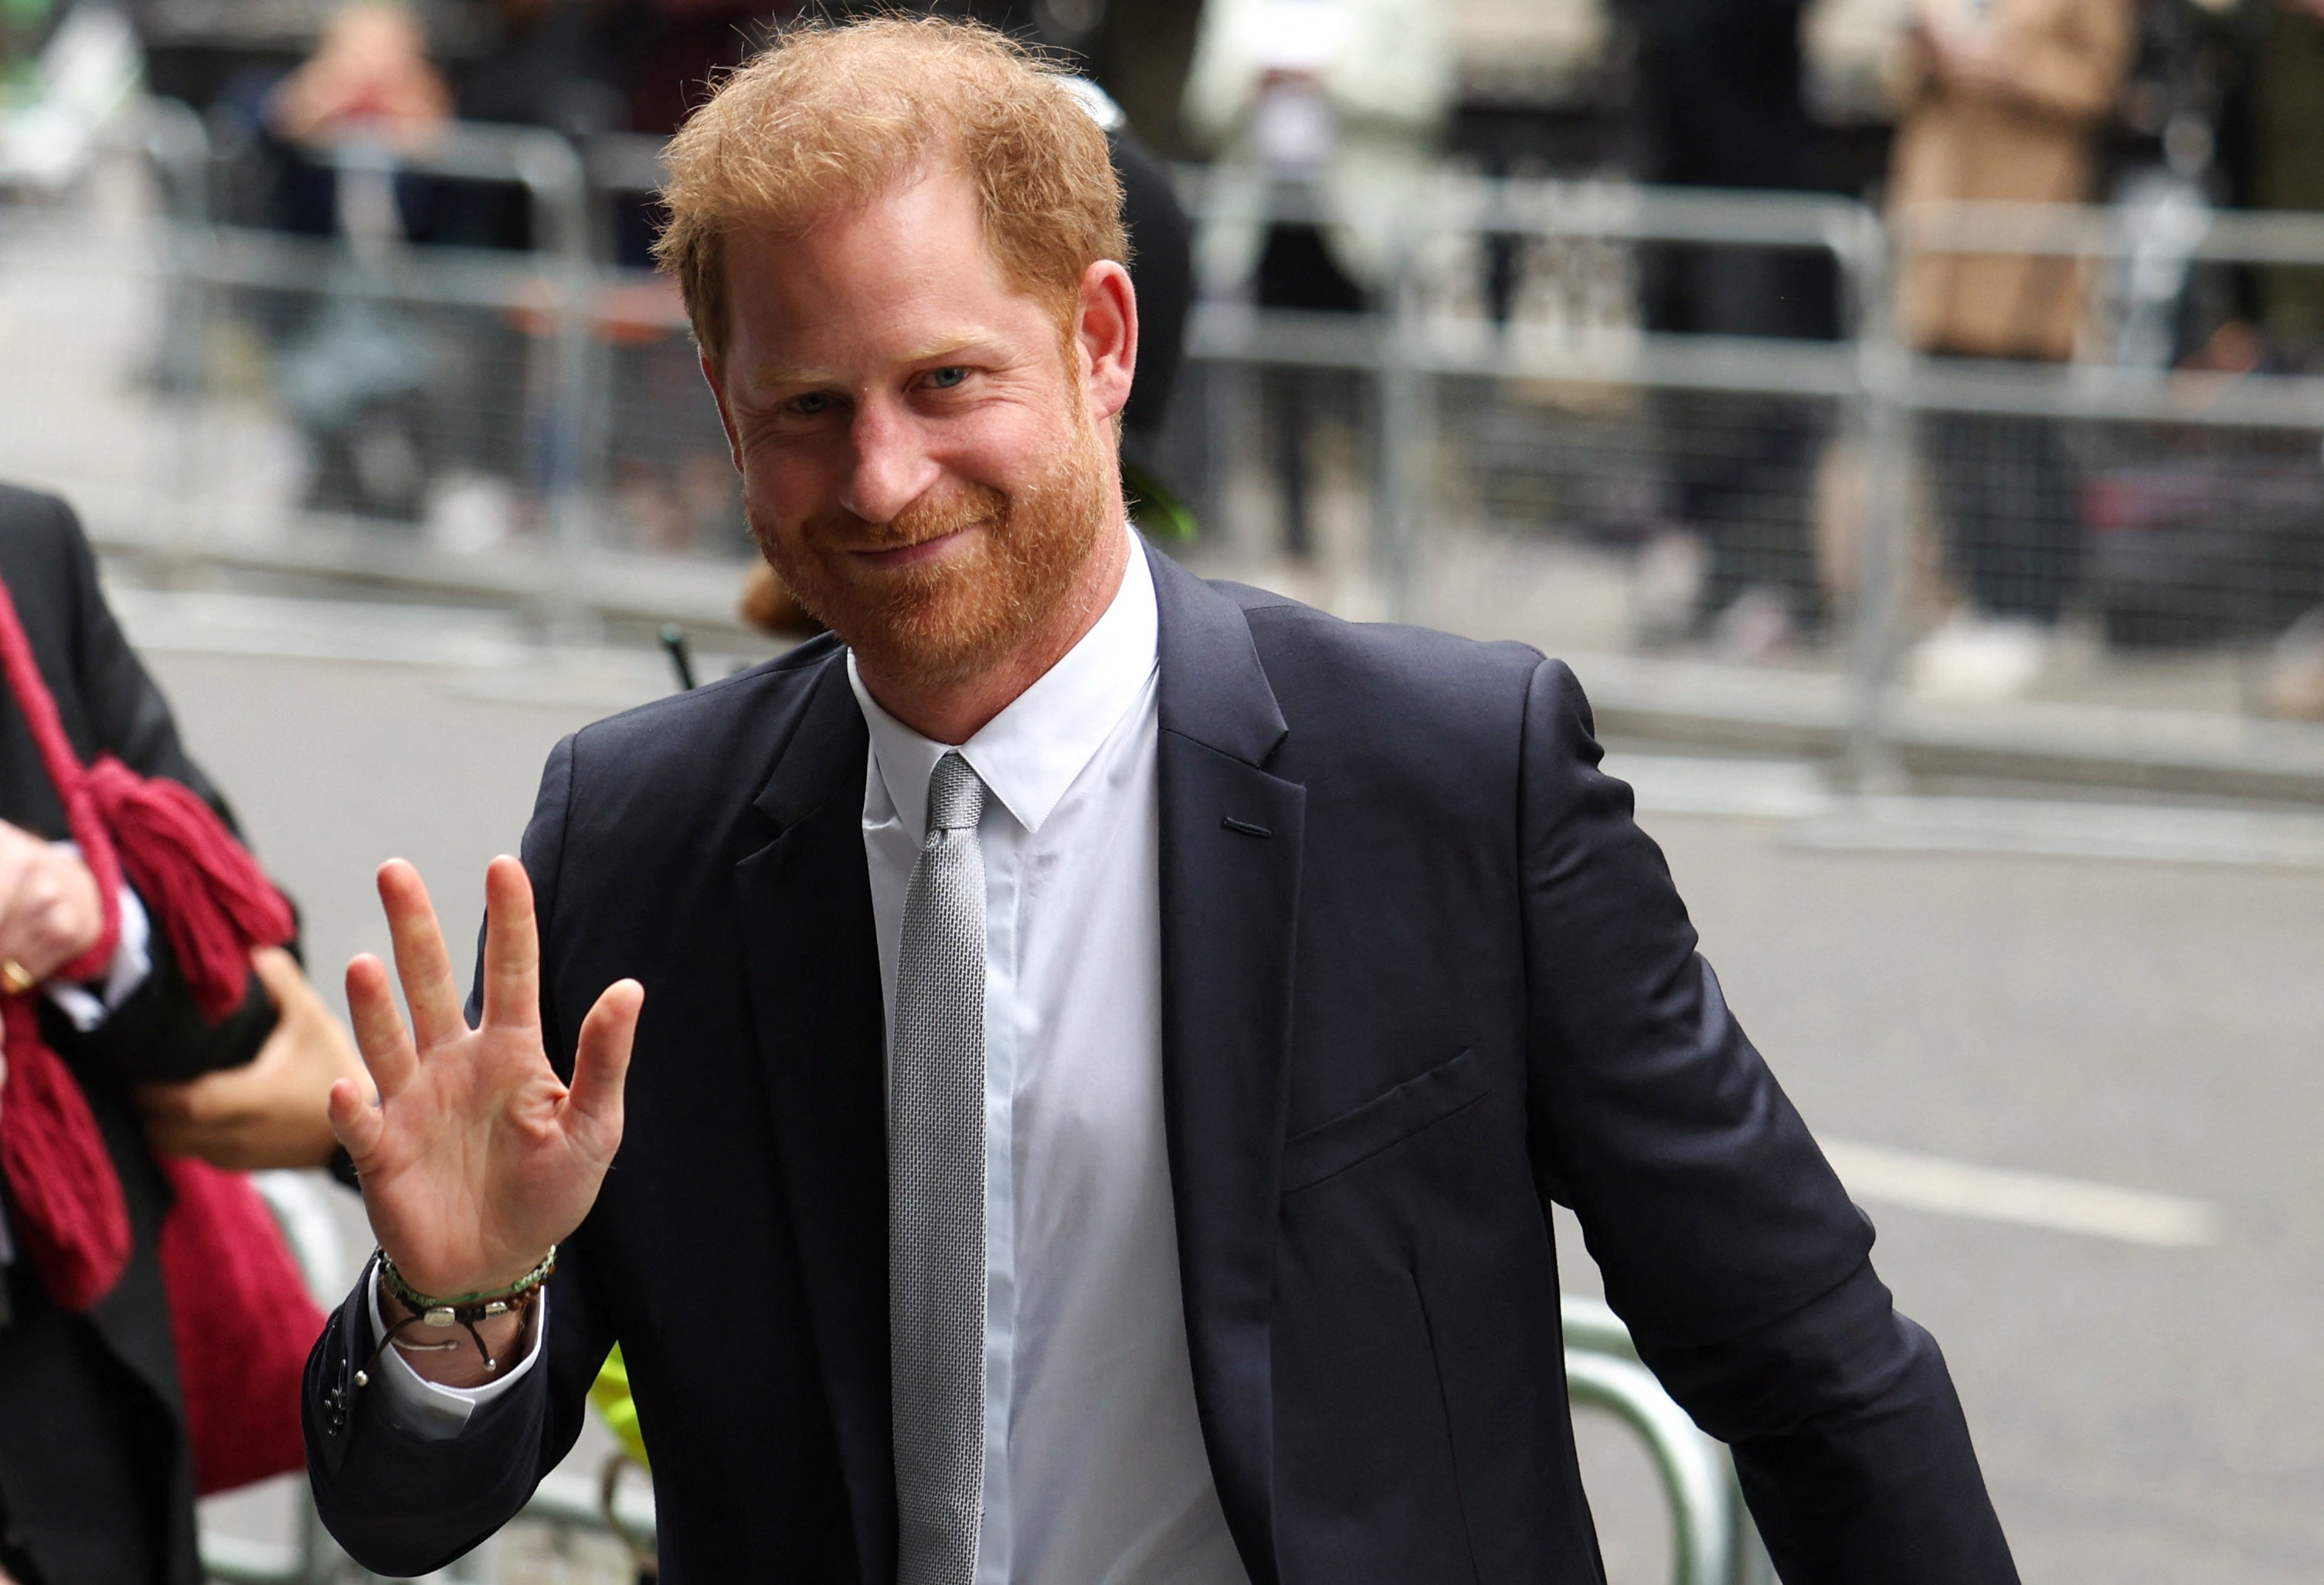 Many have argued that there are more deserving recipients of the award than Prince Harry.